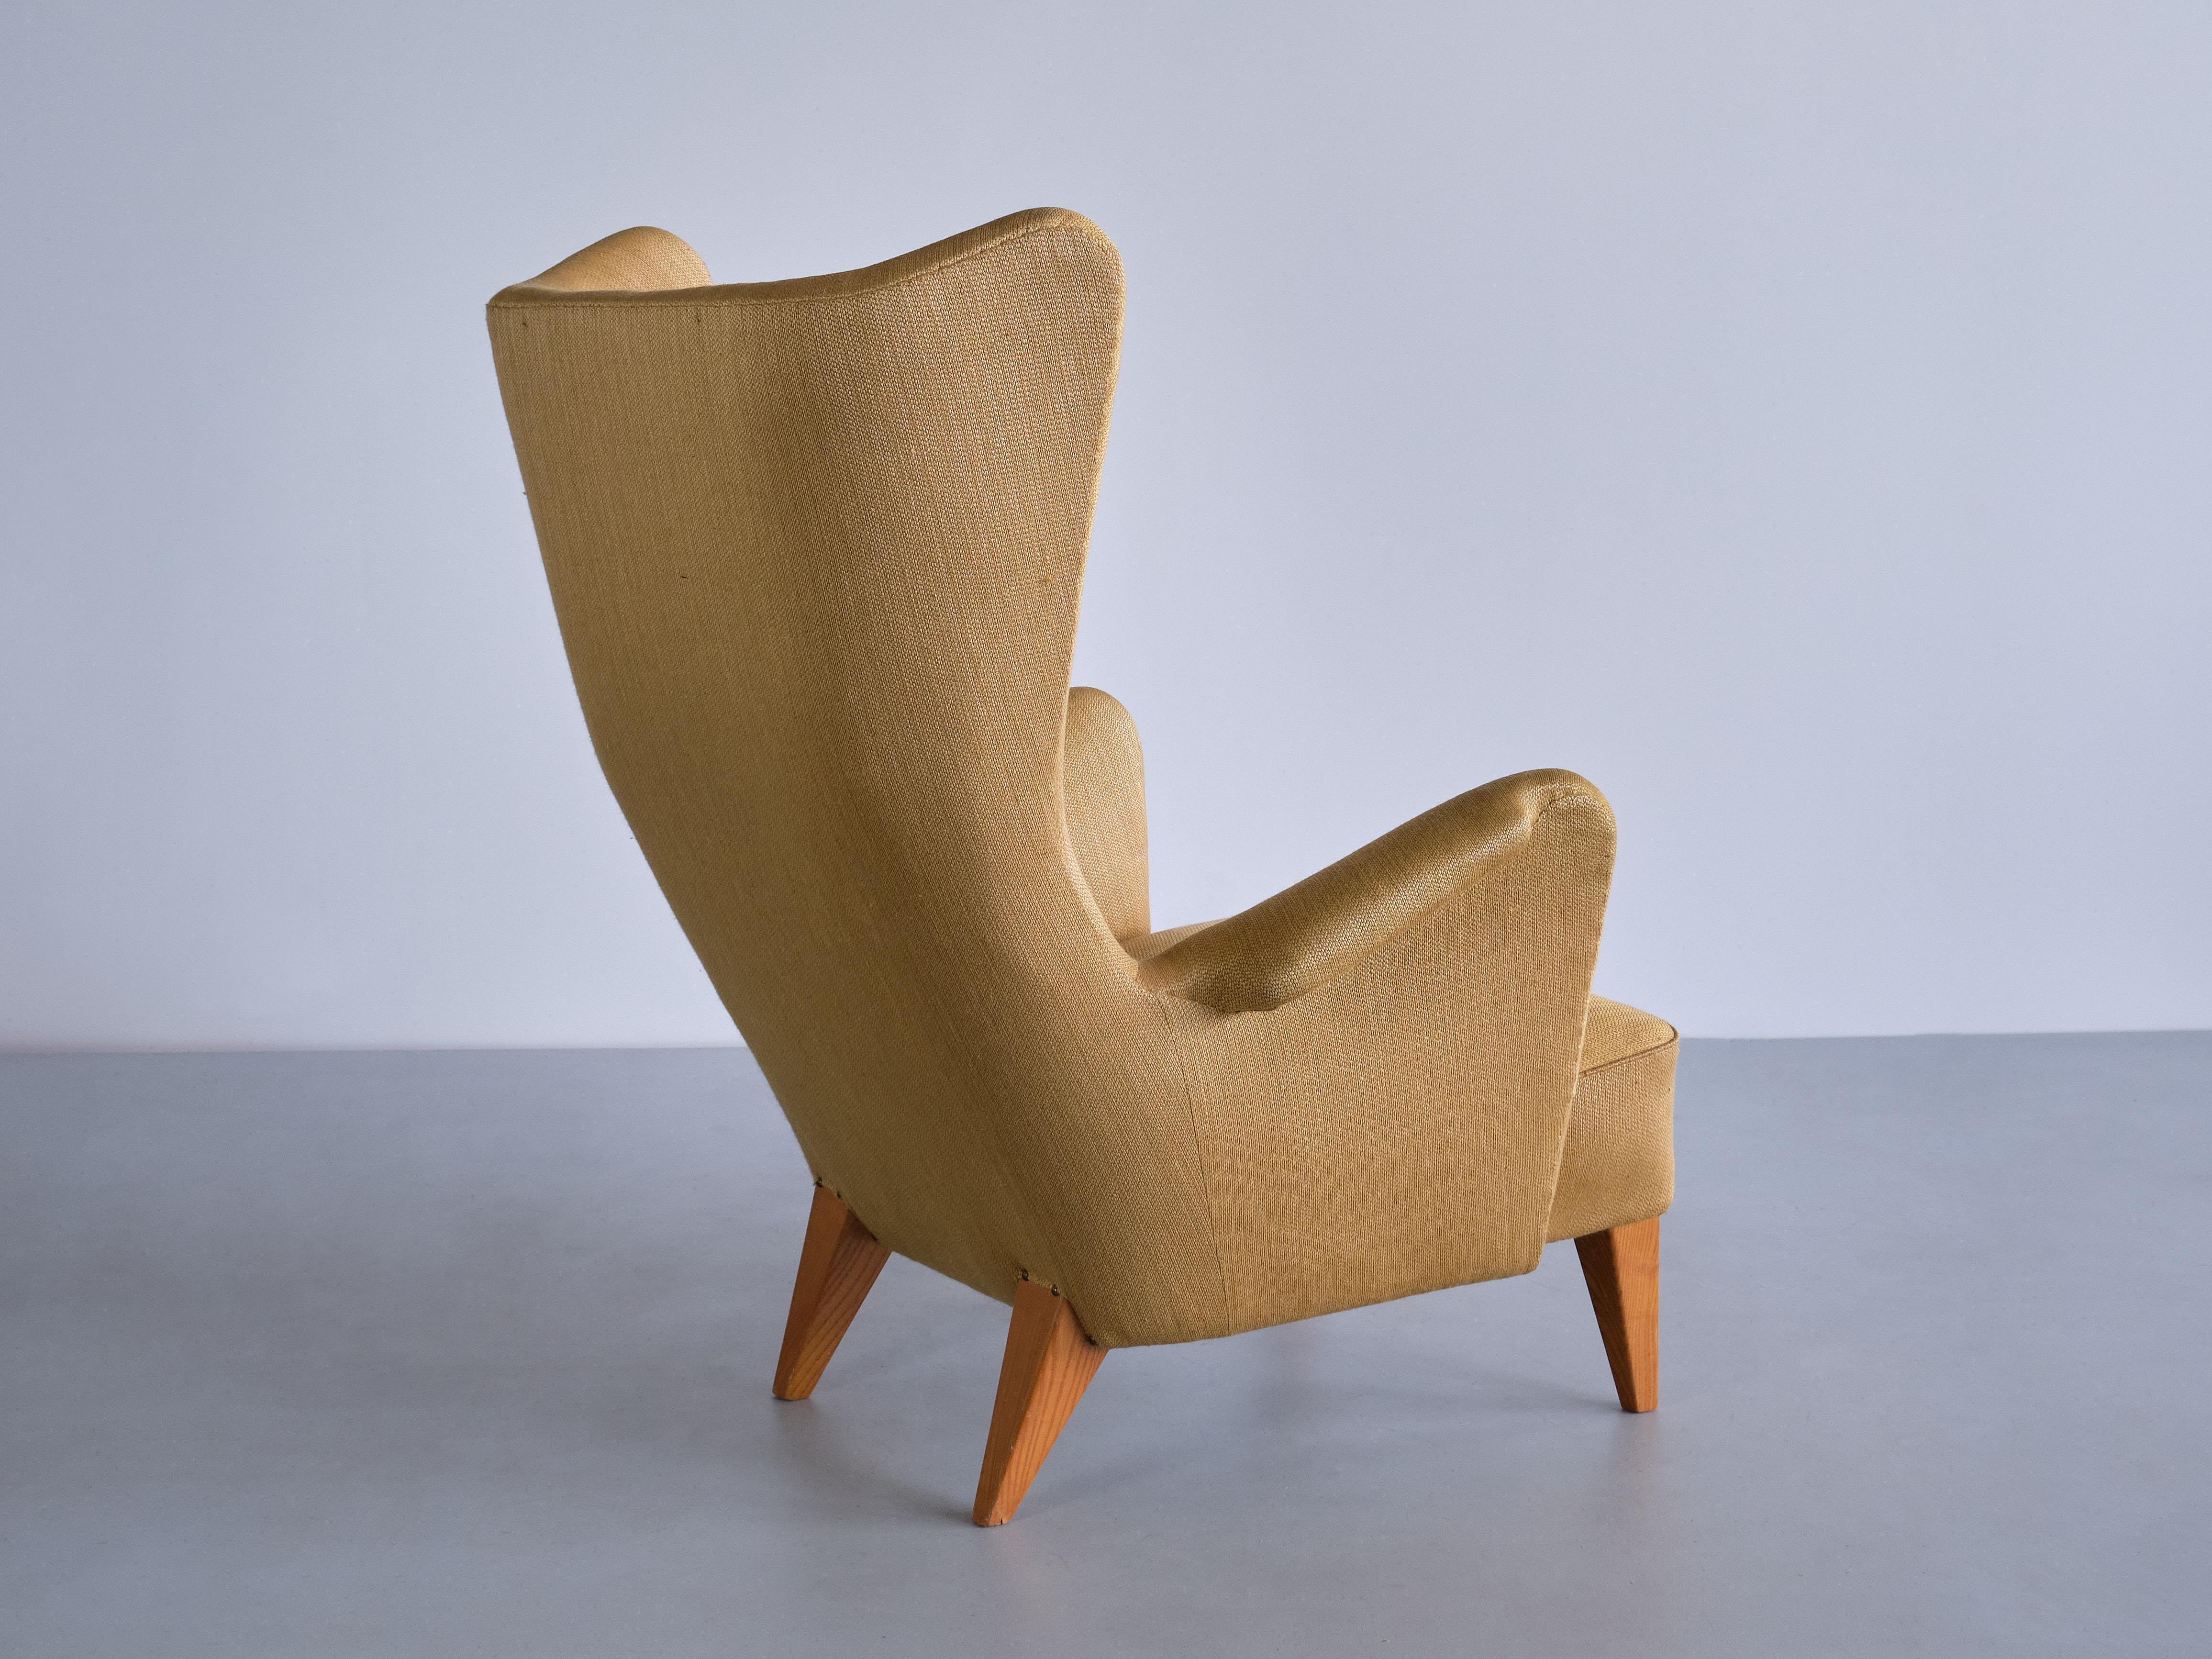 Fabric Gustav Axel Berg Attributed Wingback Chair in Yellow Wool and Elm, Sweden, 1940s For Sale